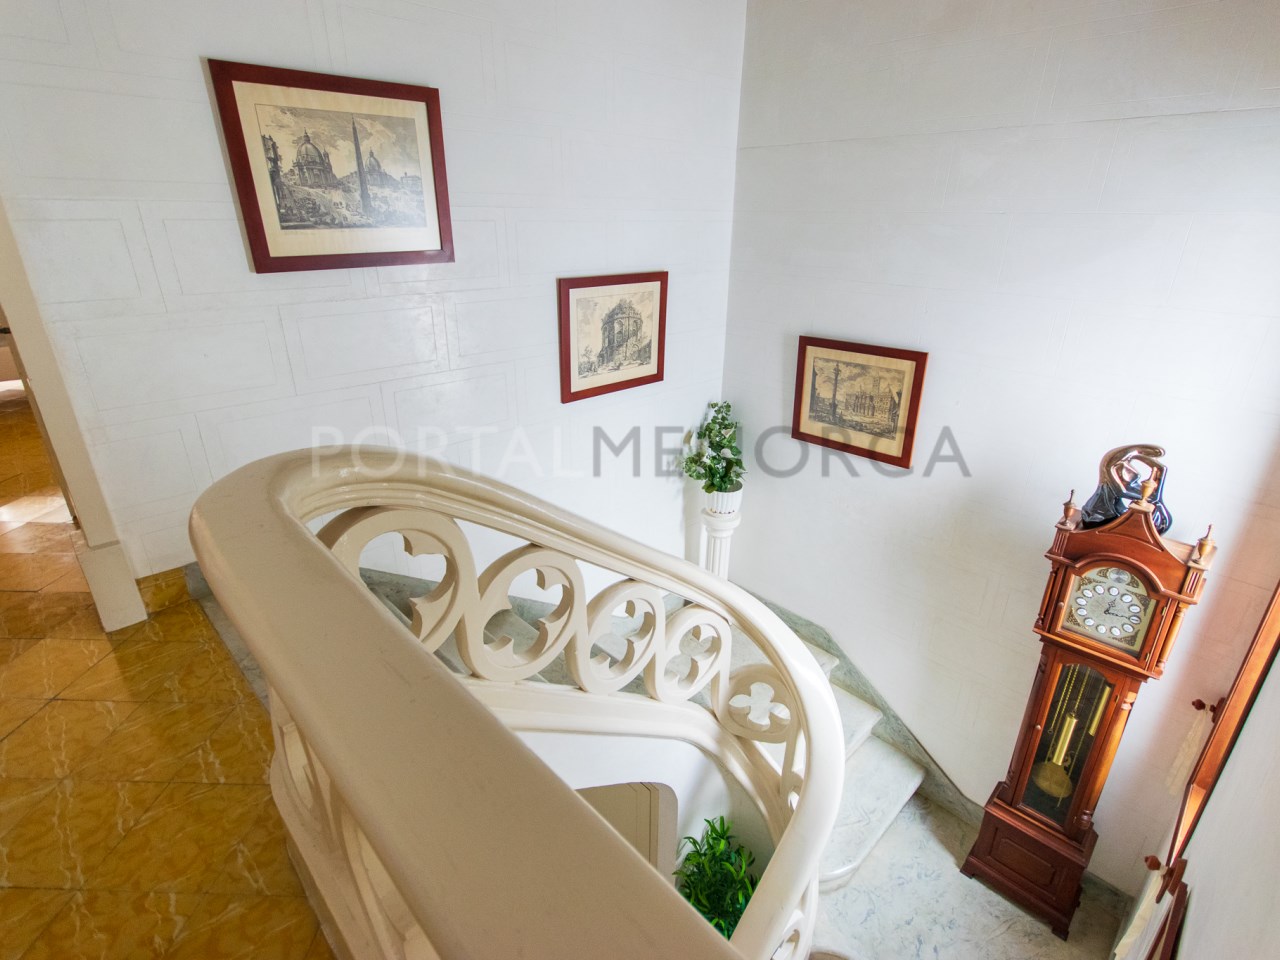 Original staircase in whole house with orchard for sale in Alaior